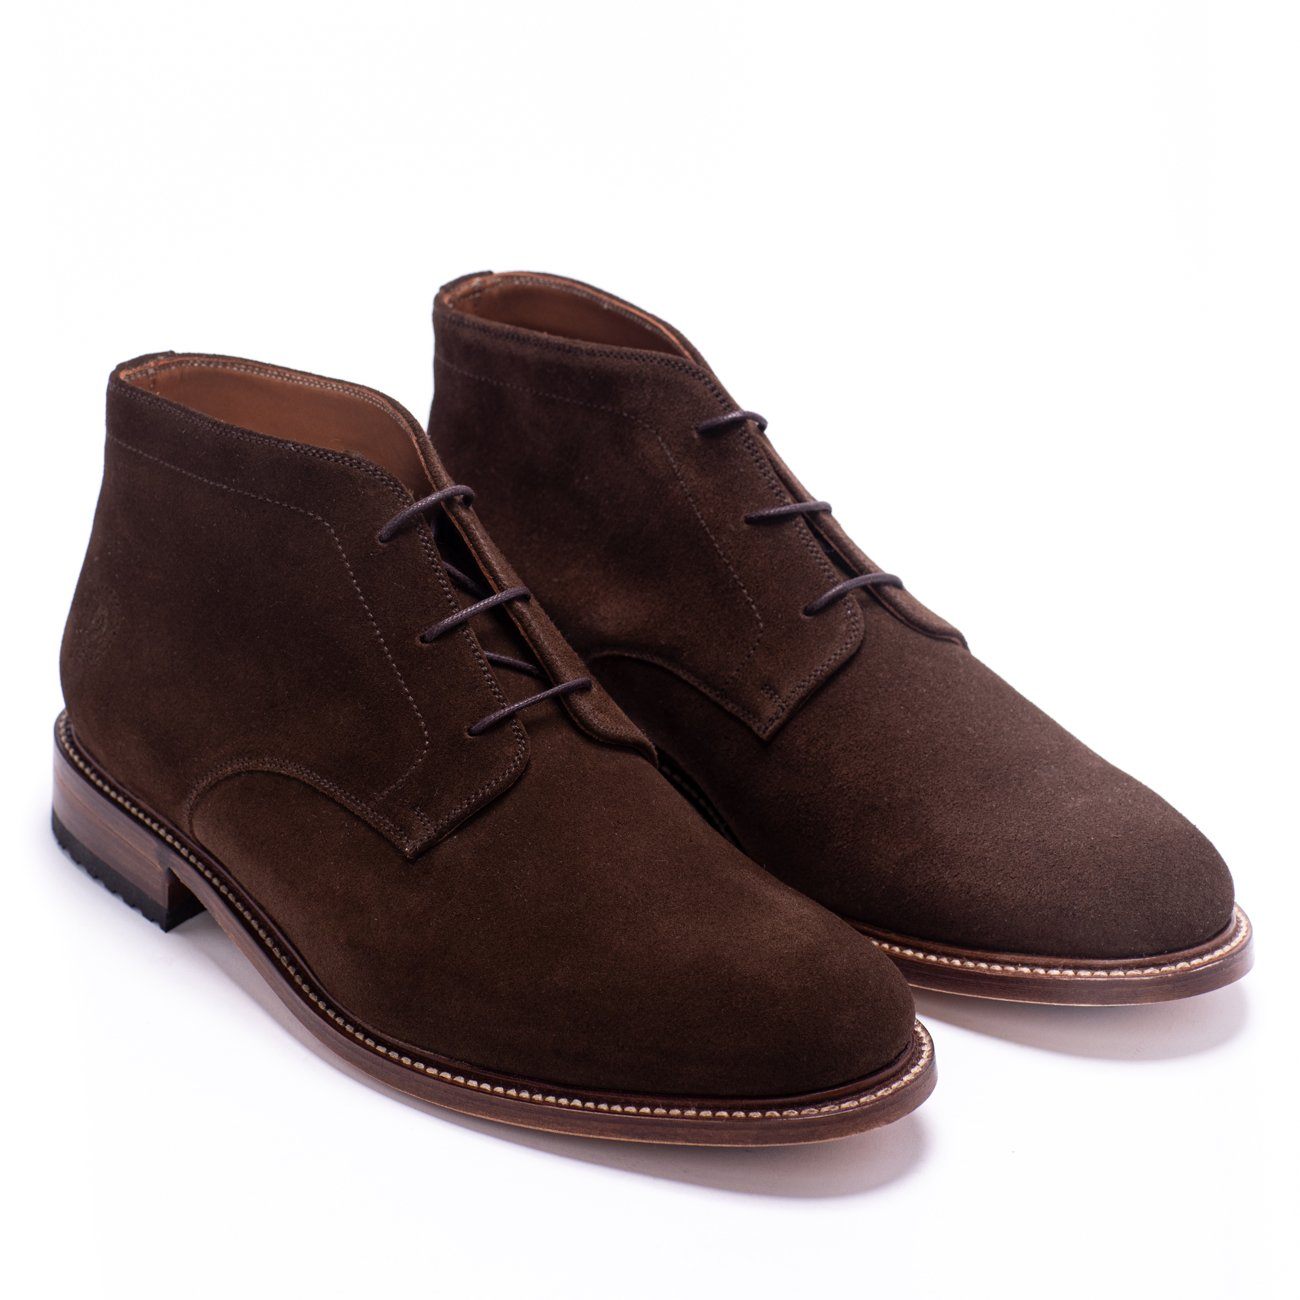 Mens Redseed Chukka Brown Suede Boot - Ranch Road Boots™ Pair